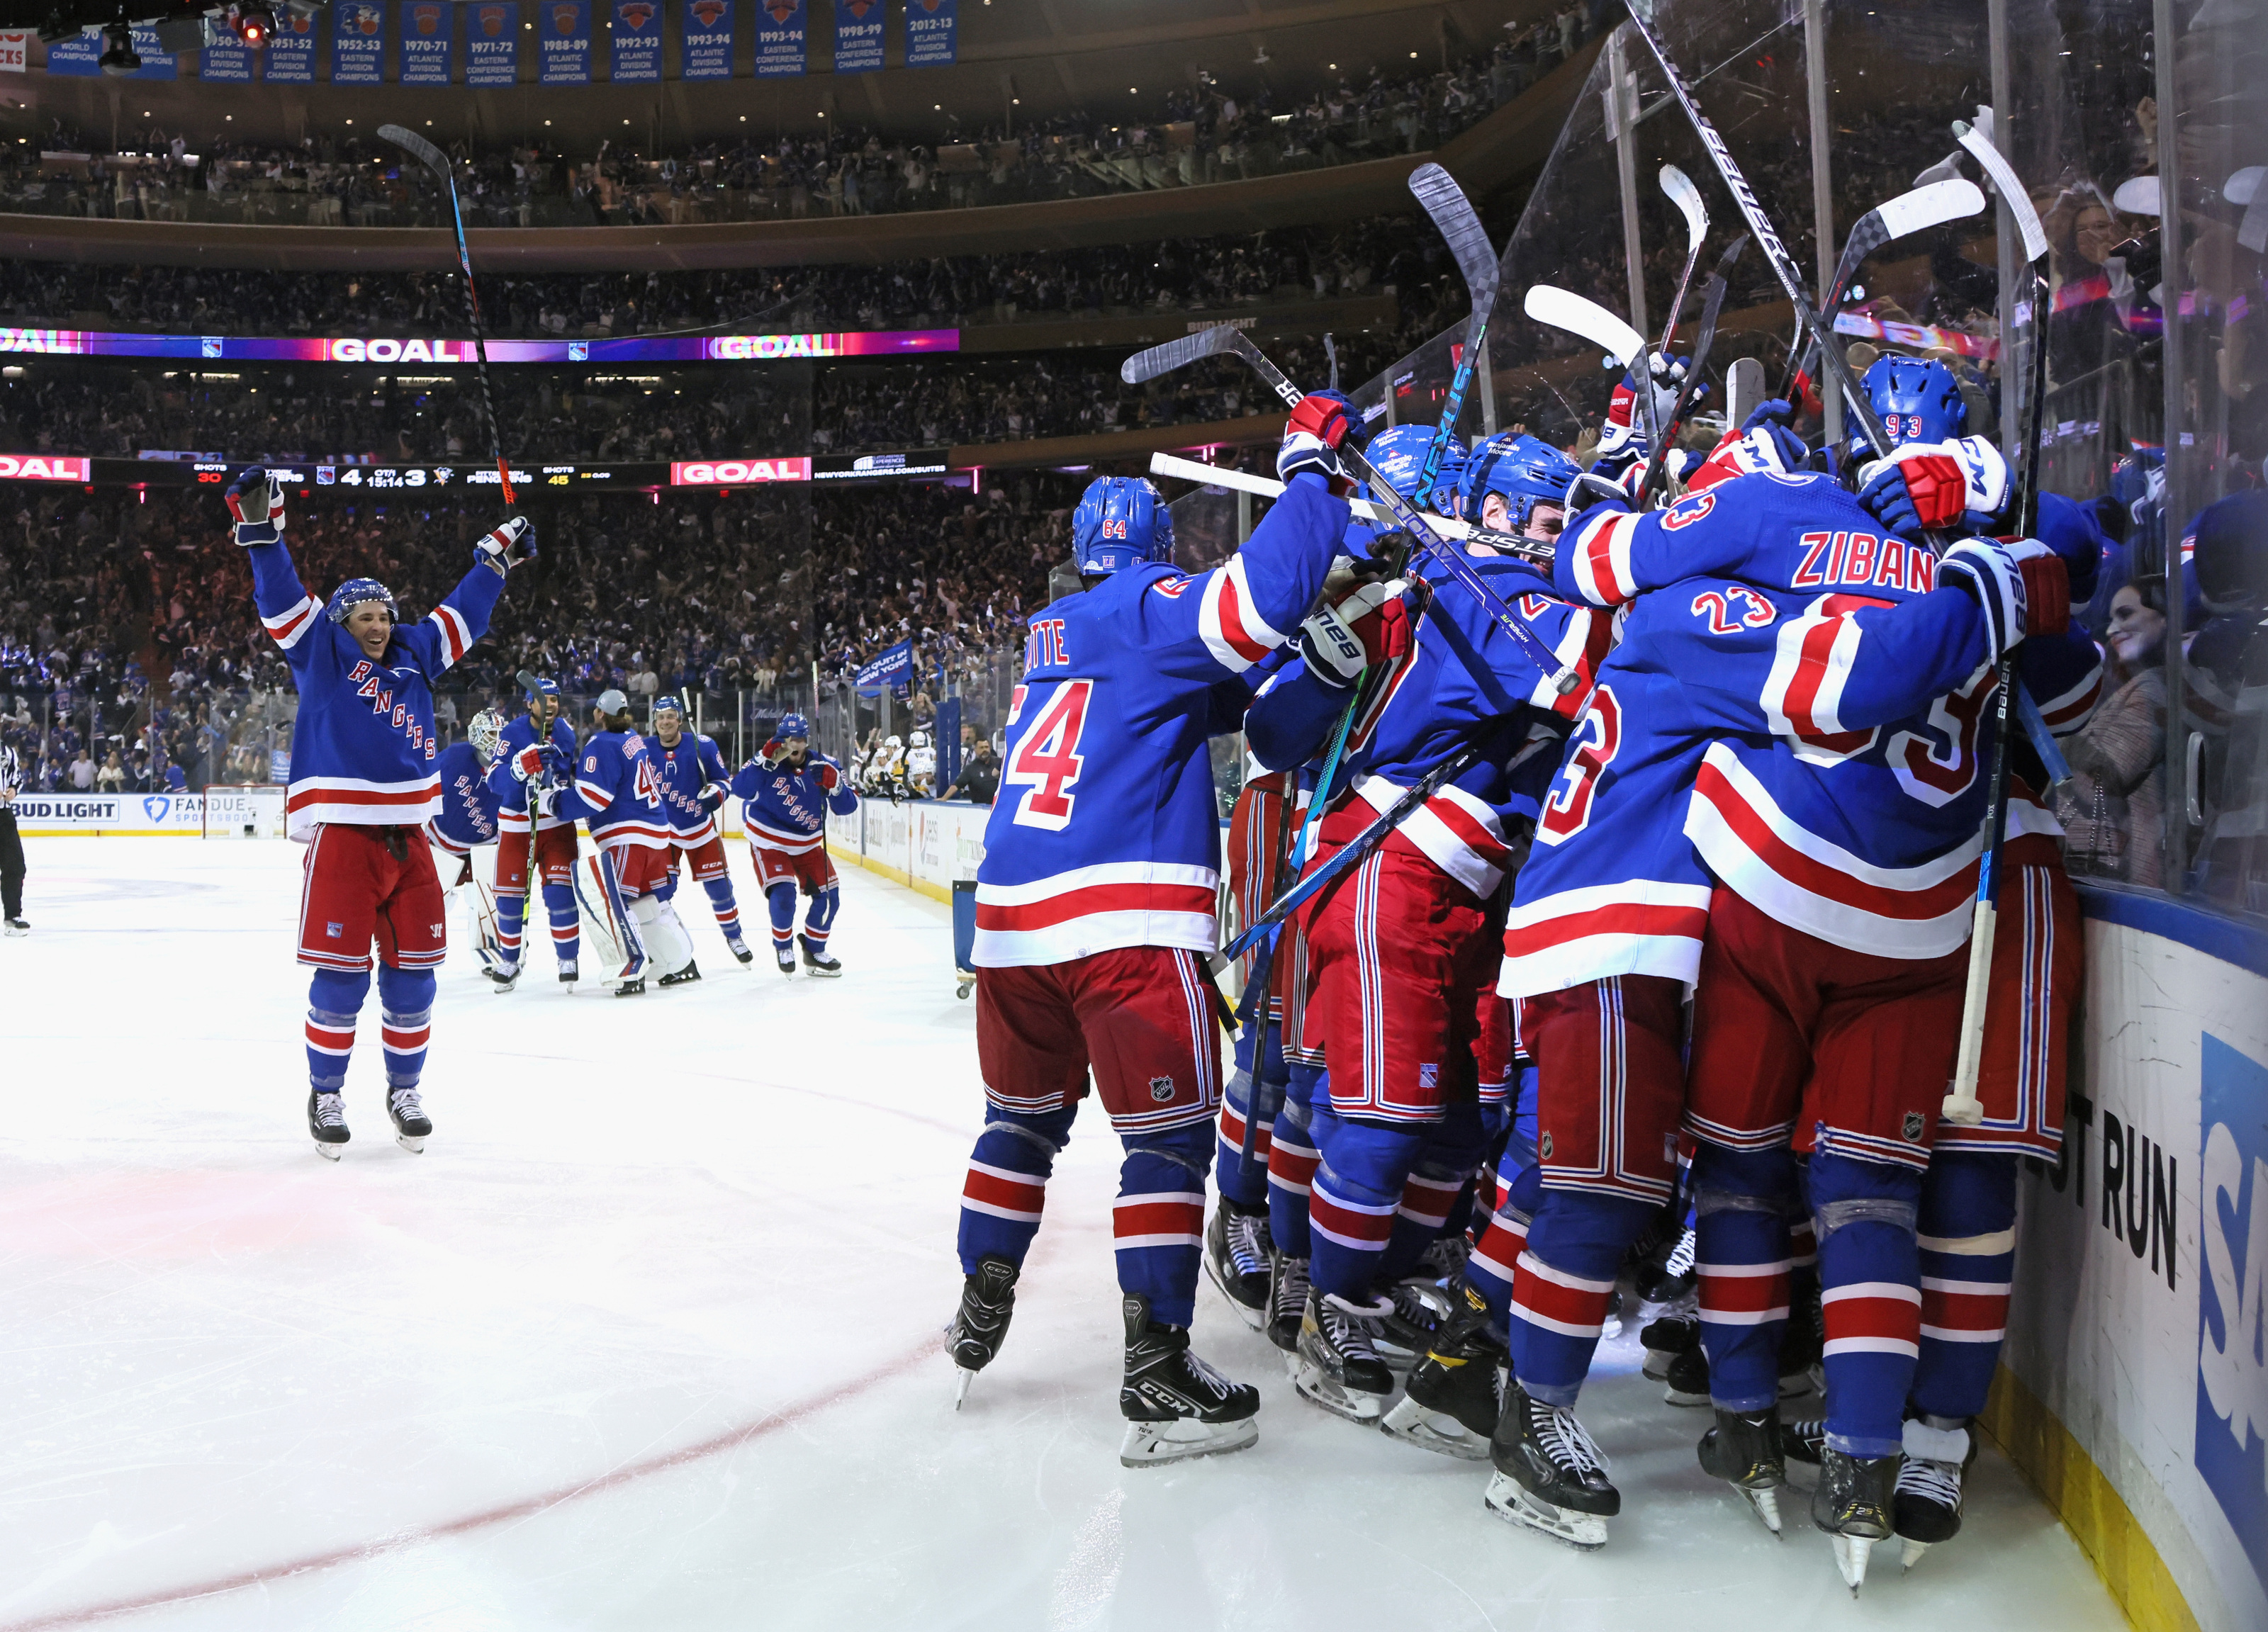 It's win or go home for the New York Rangers in Game 7